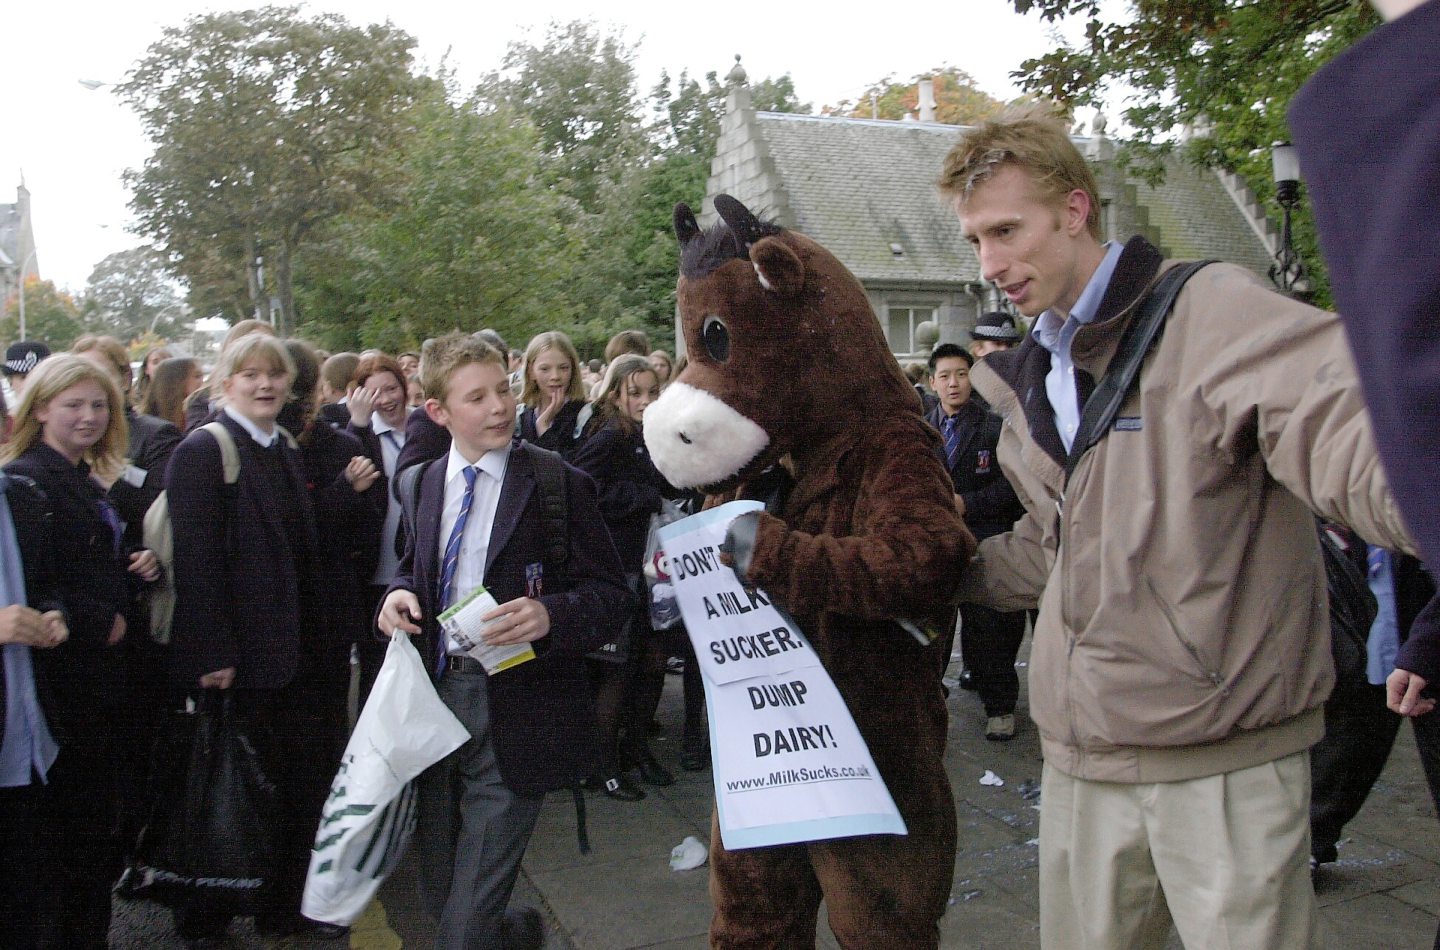 PETA 'Dump Dairy' campaign director Sean Gifford leaving Aberdeen Grammar School after being pelted with milk cartons by school children in 2002.